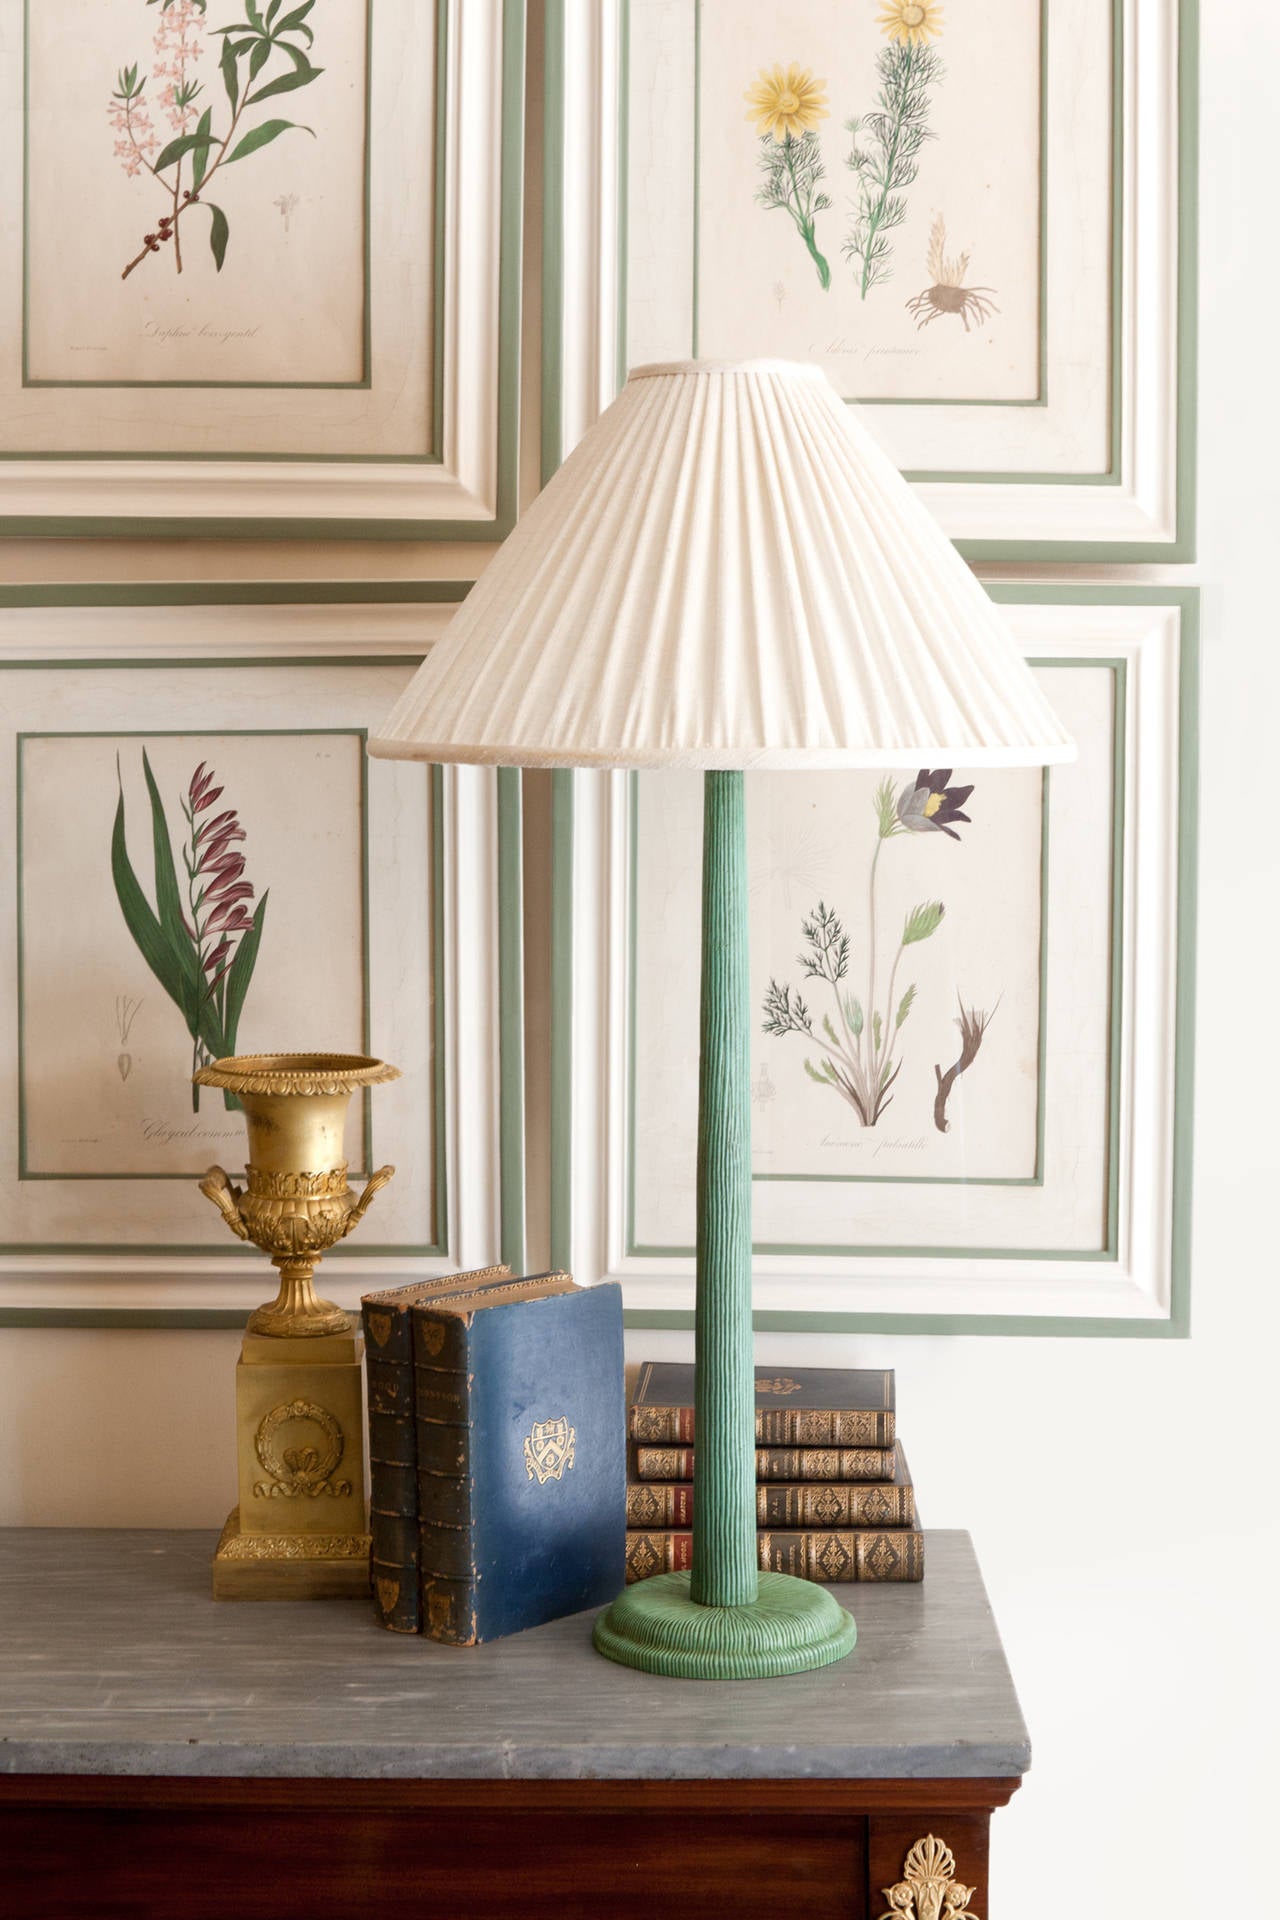 The Horbury table lamp is designed by Julia Boston. Made in England of cast brass. Shown here with a gathered raw silk off-white or buff colored 16